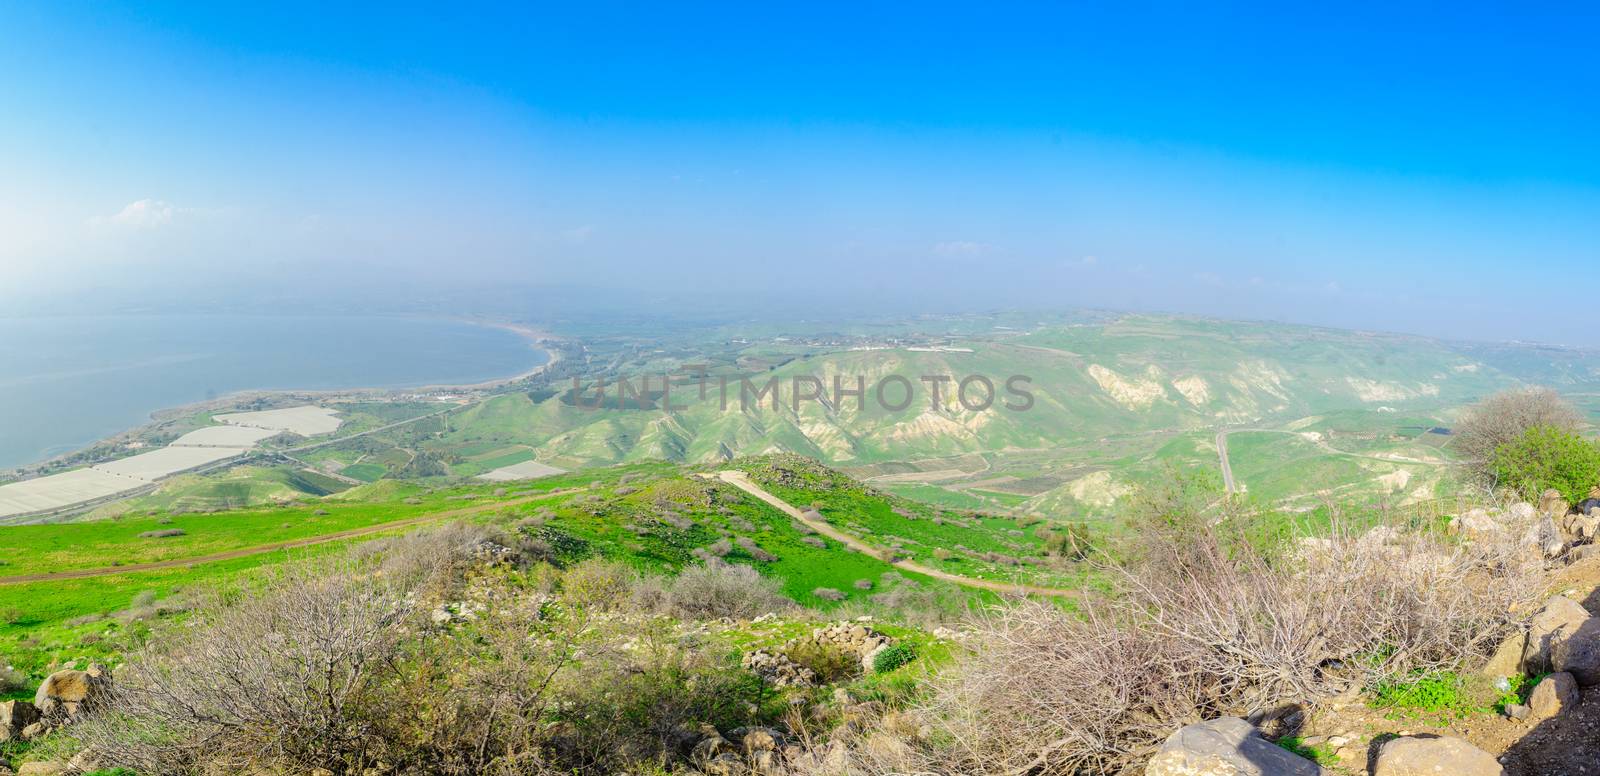 The Sea of Galilee by RnDmS